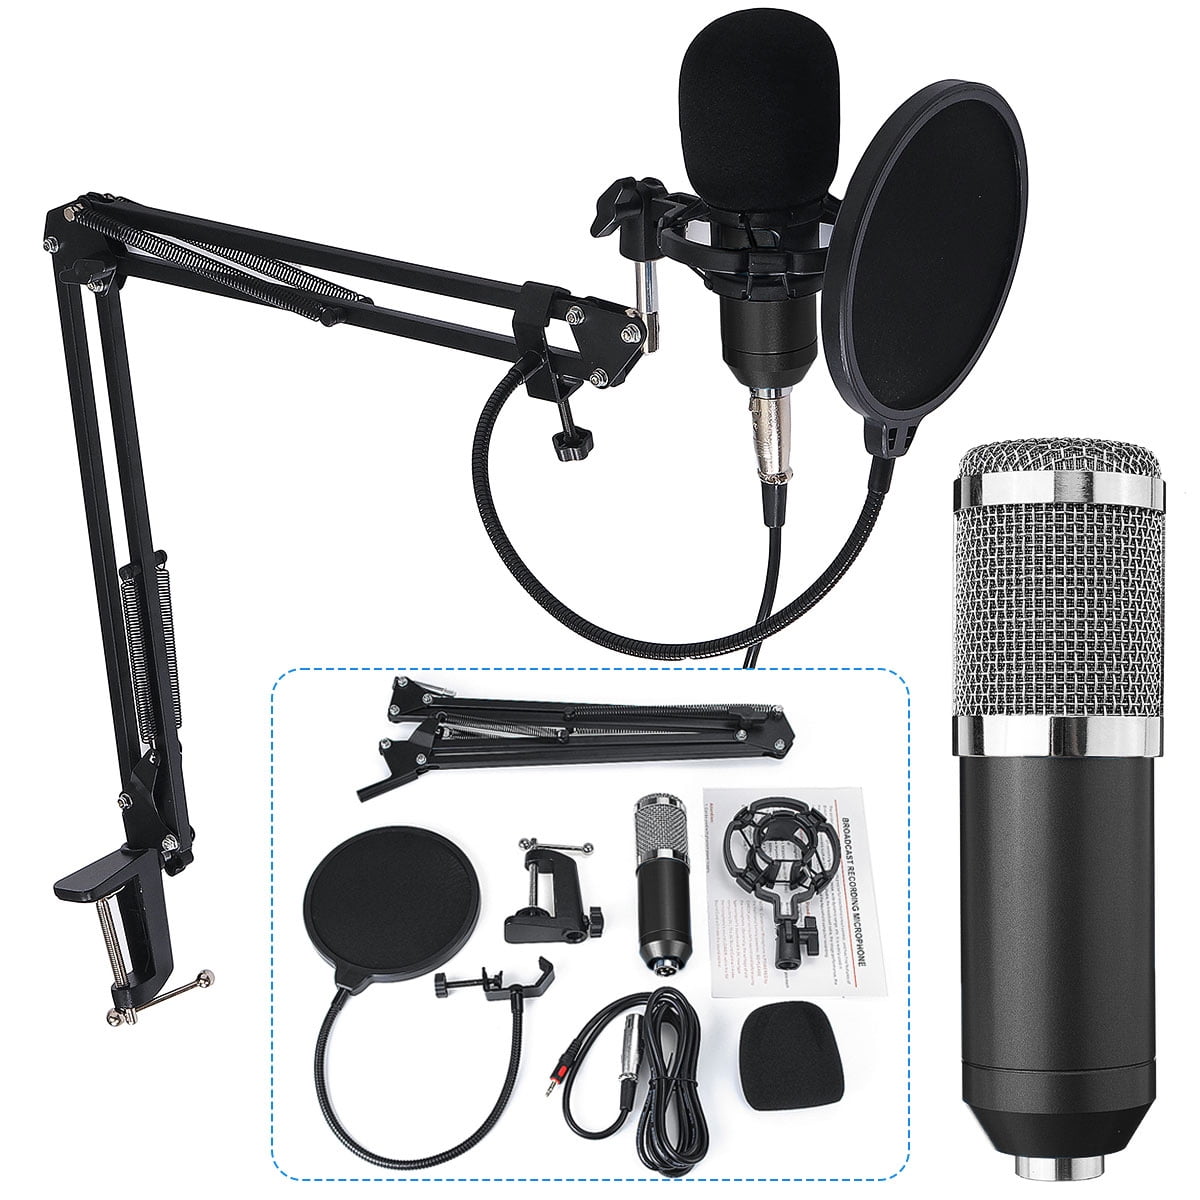 The SCM-700 8-Piece Condenser Microphone Recording Kit Ideal for  Podcasting, Voice-Over, Online Videos, and Recording with Smartphones and  マイク